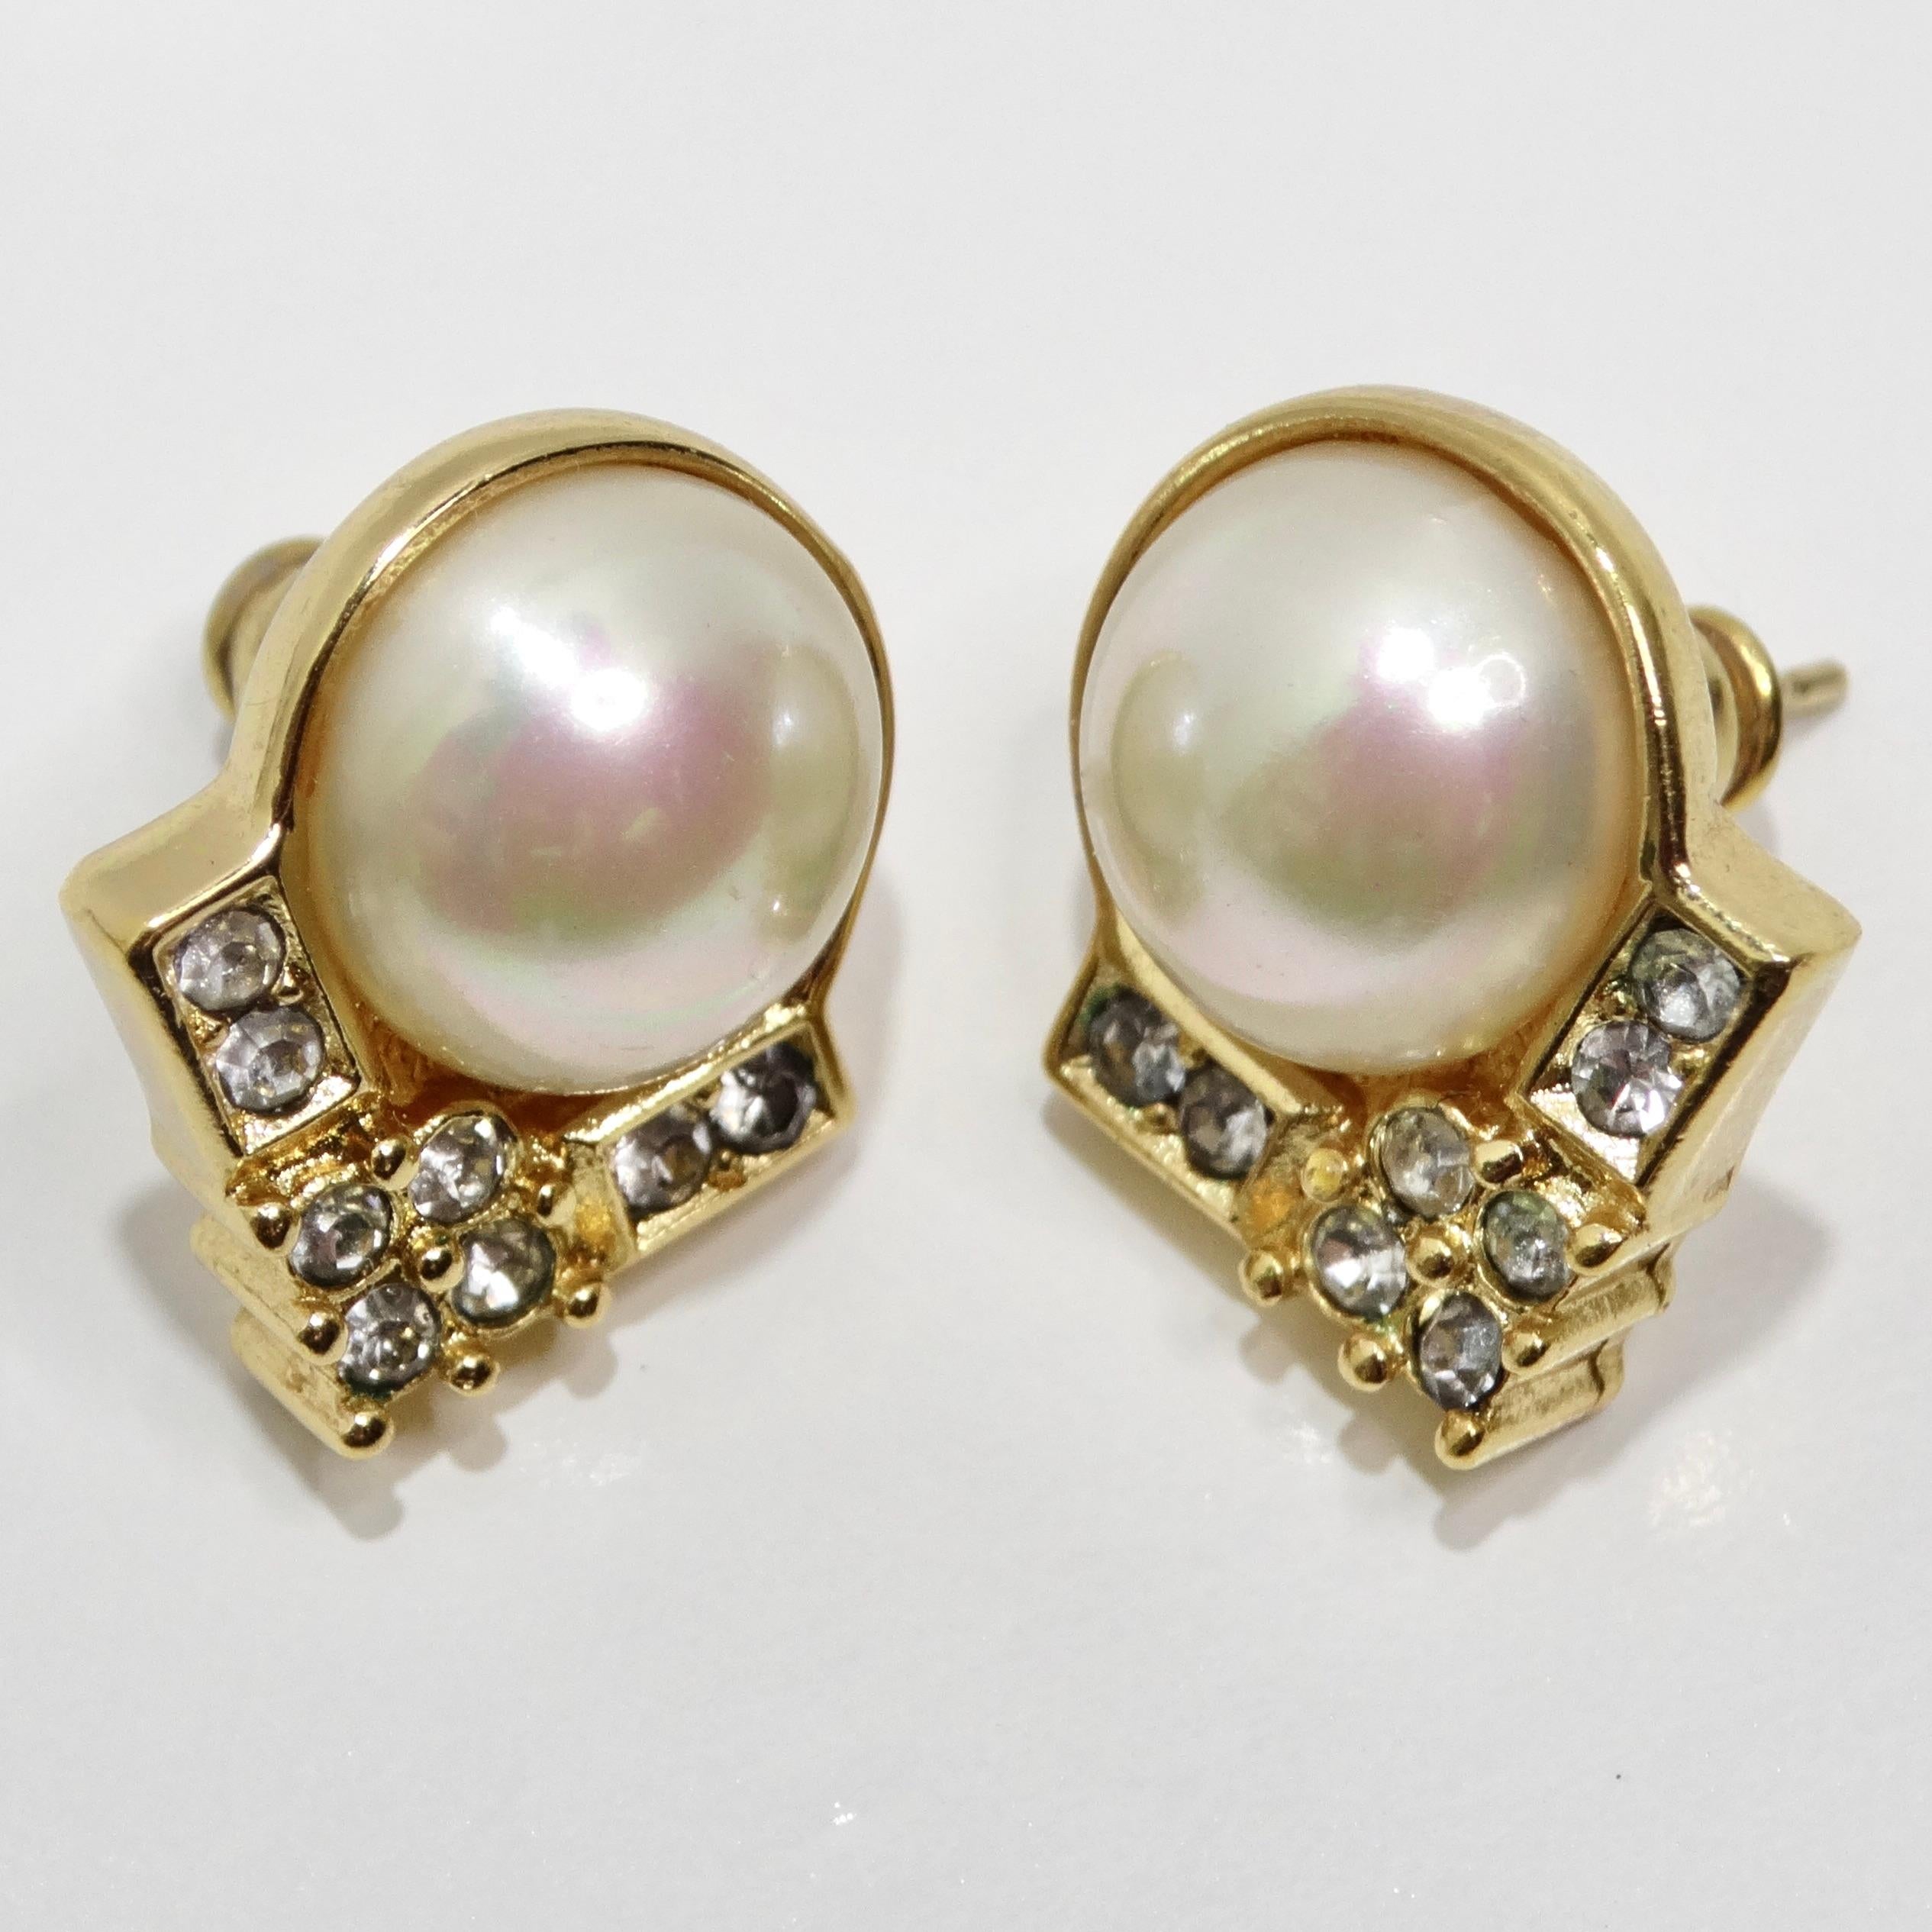 14K Gold Plated Vintage Pearl Earrings In Good Condition For Sale In Scottsdale, AZ